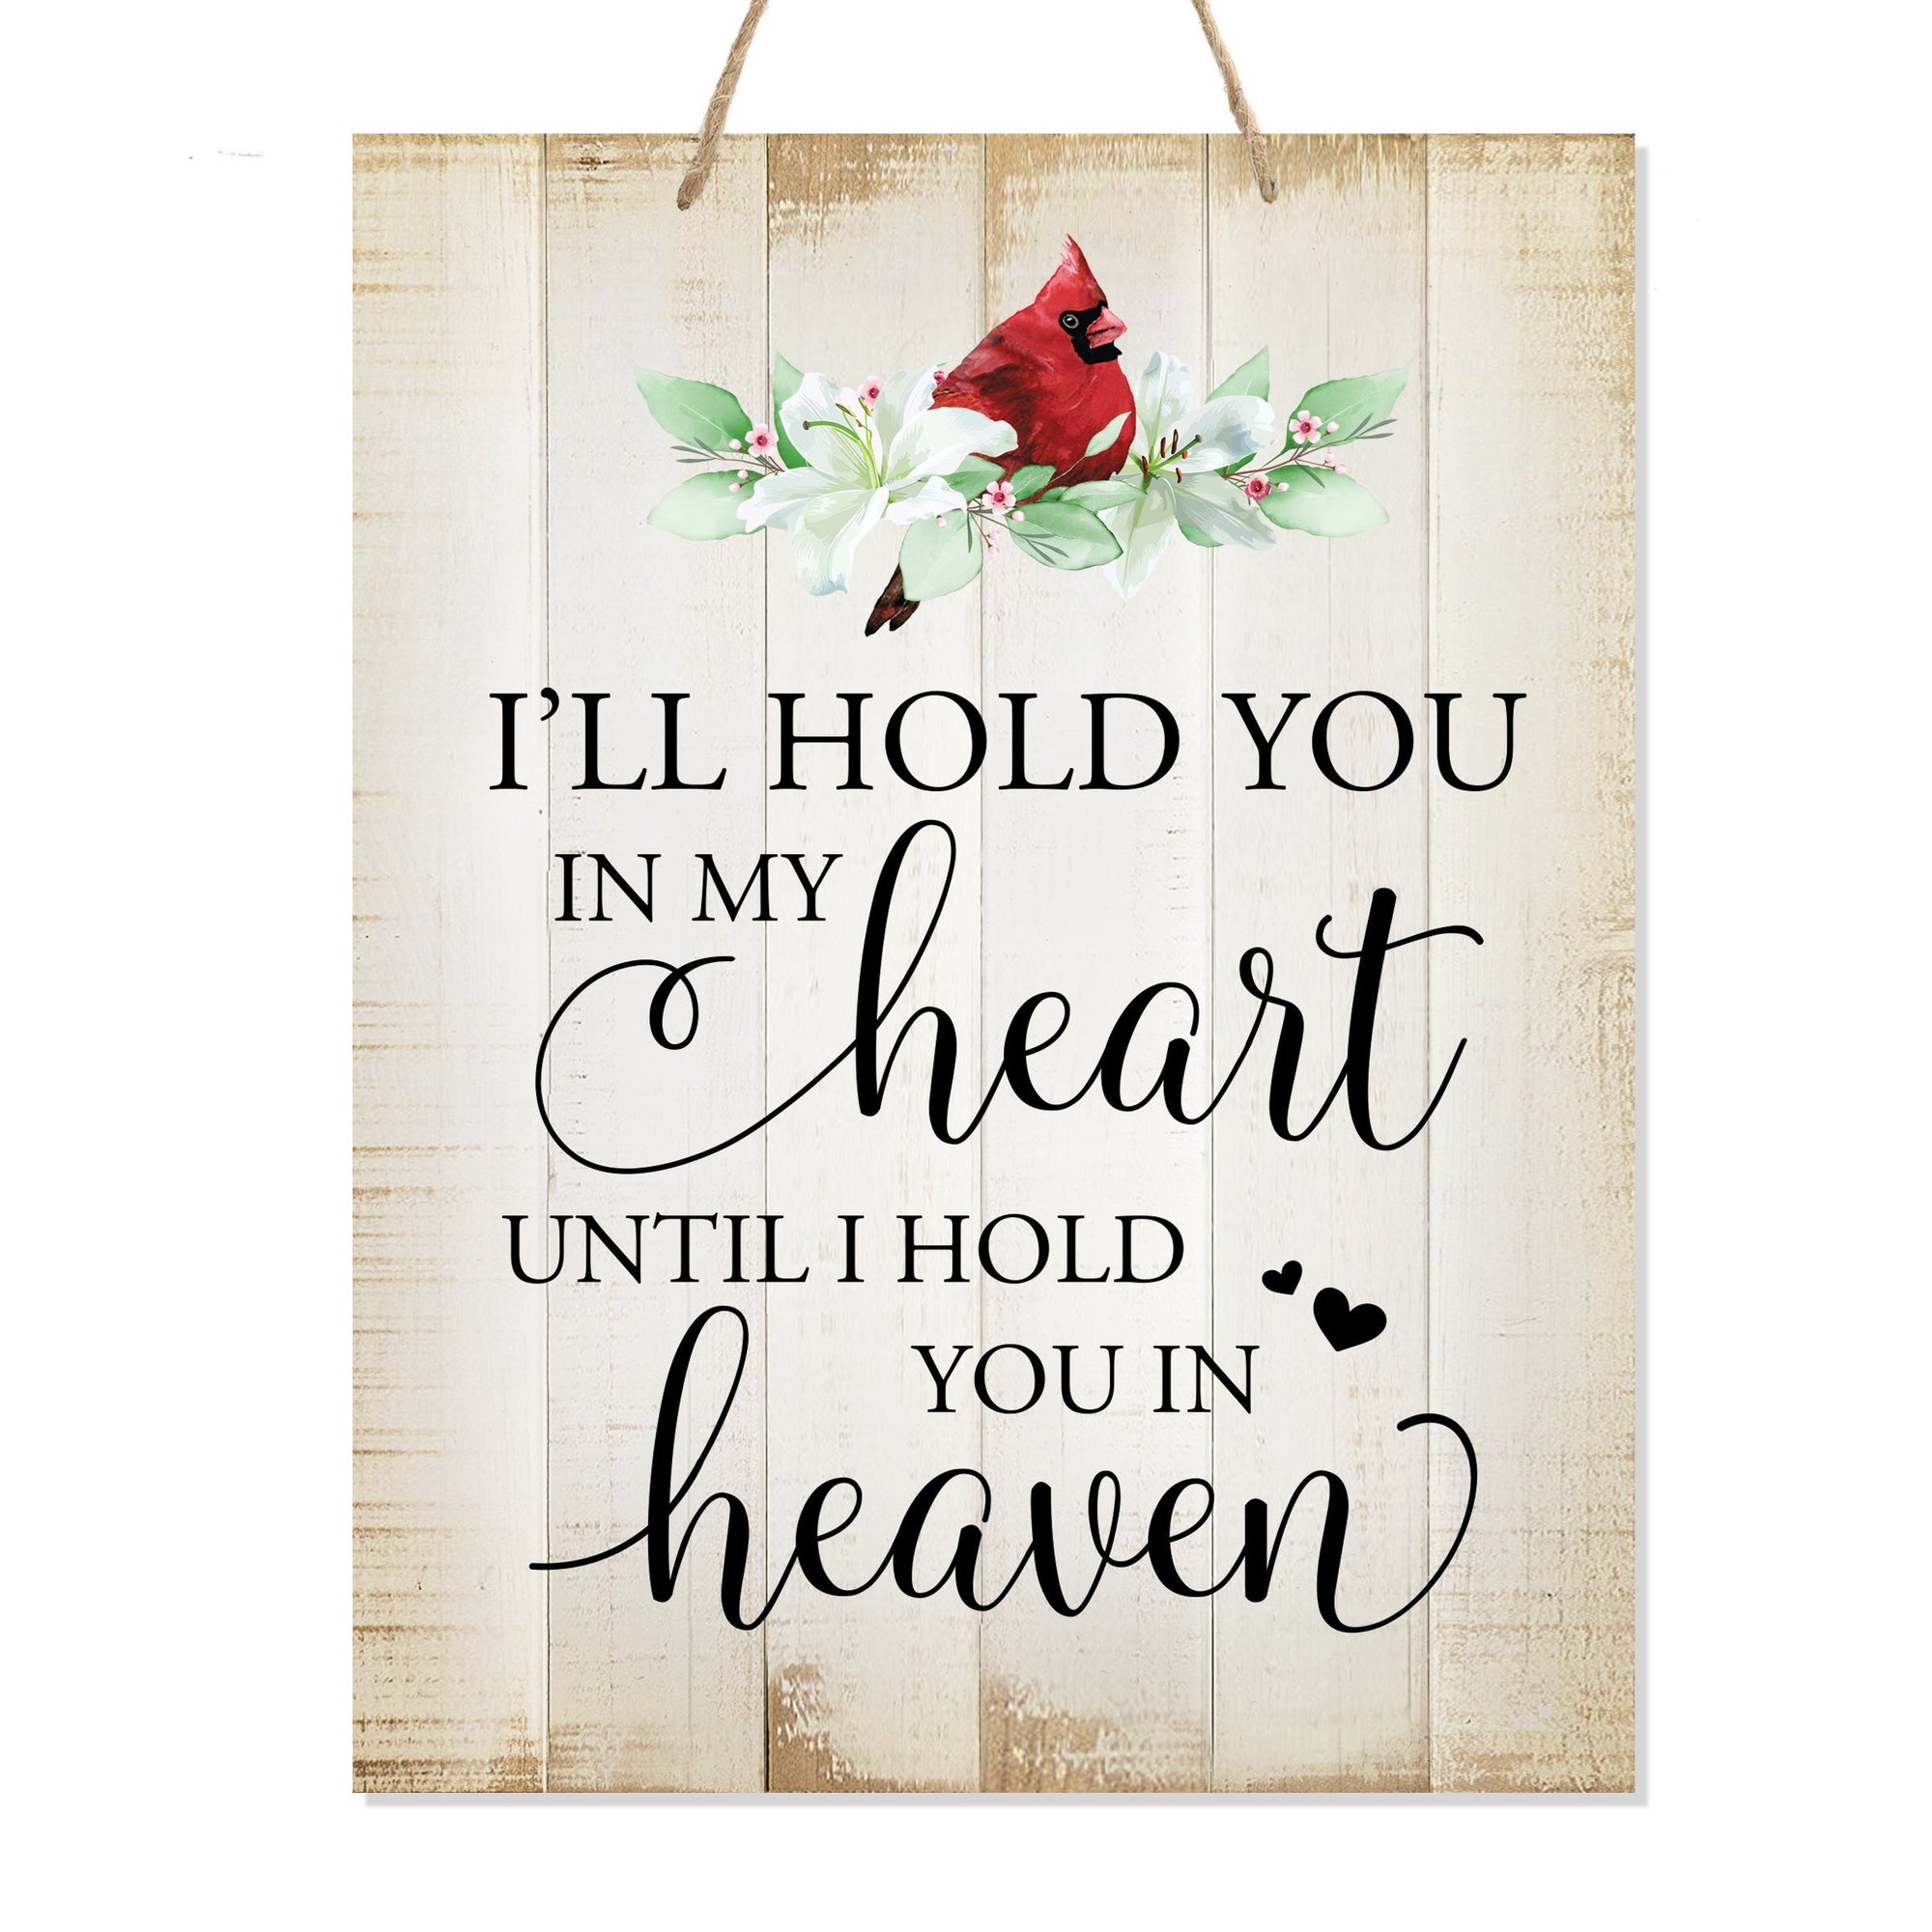 Beautiful wooden memorial signs - thoughtful loved one memorial gifts.